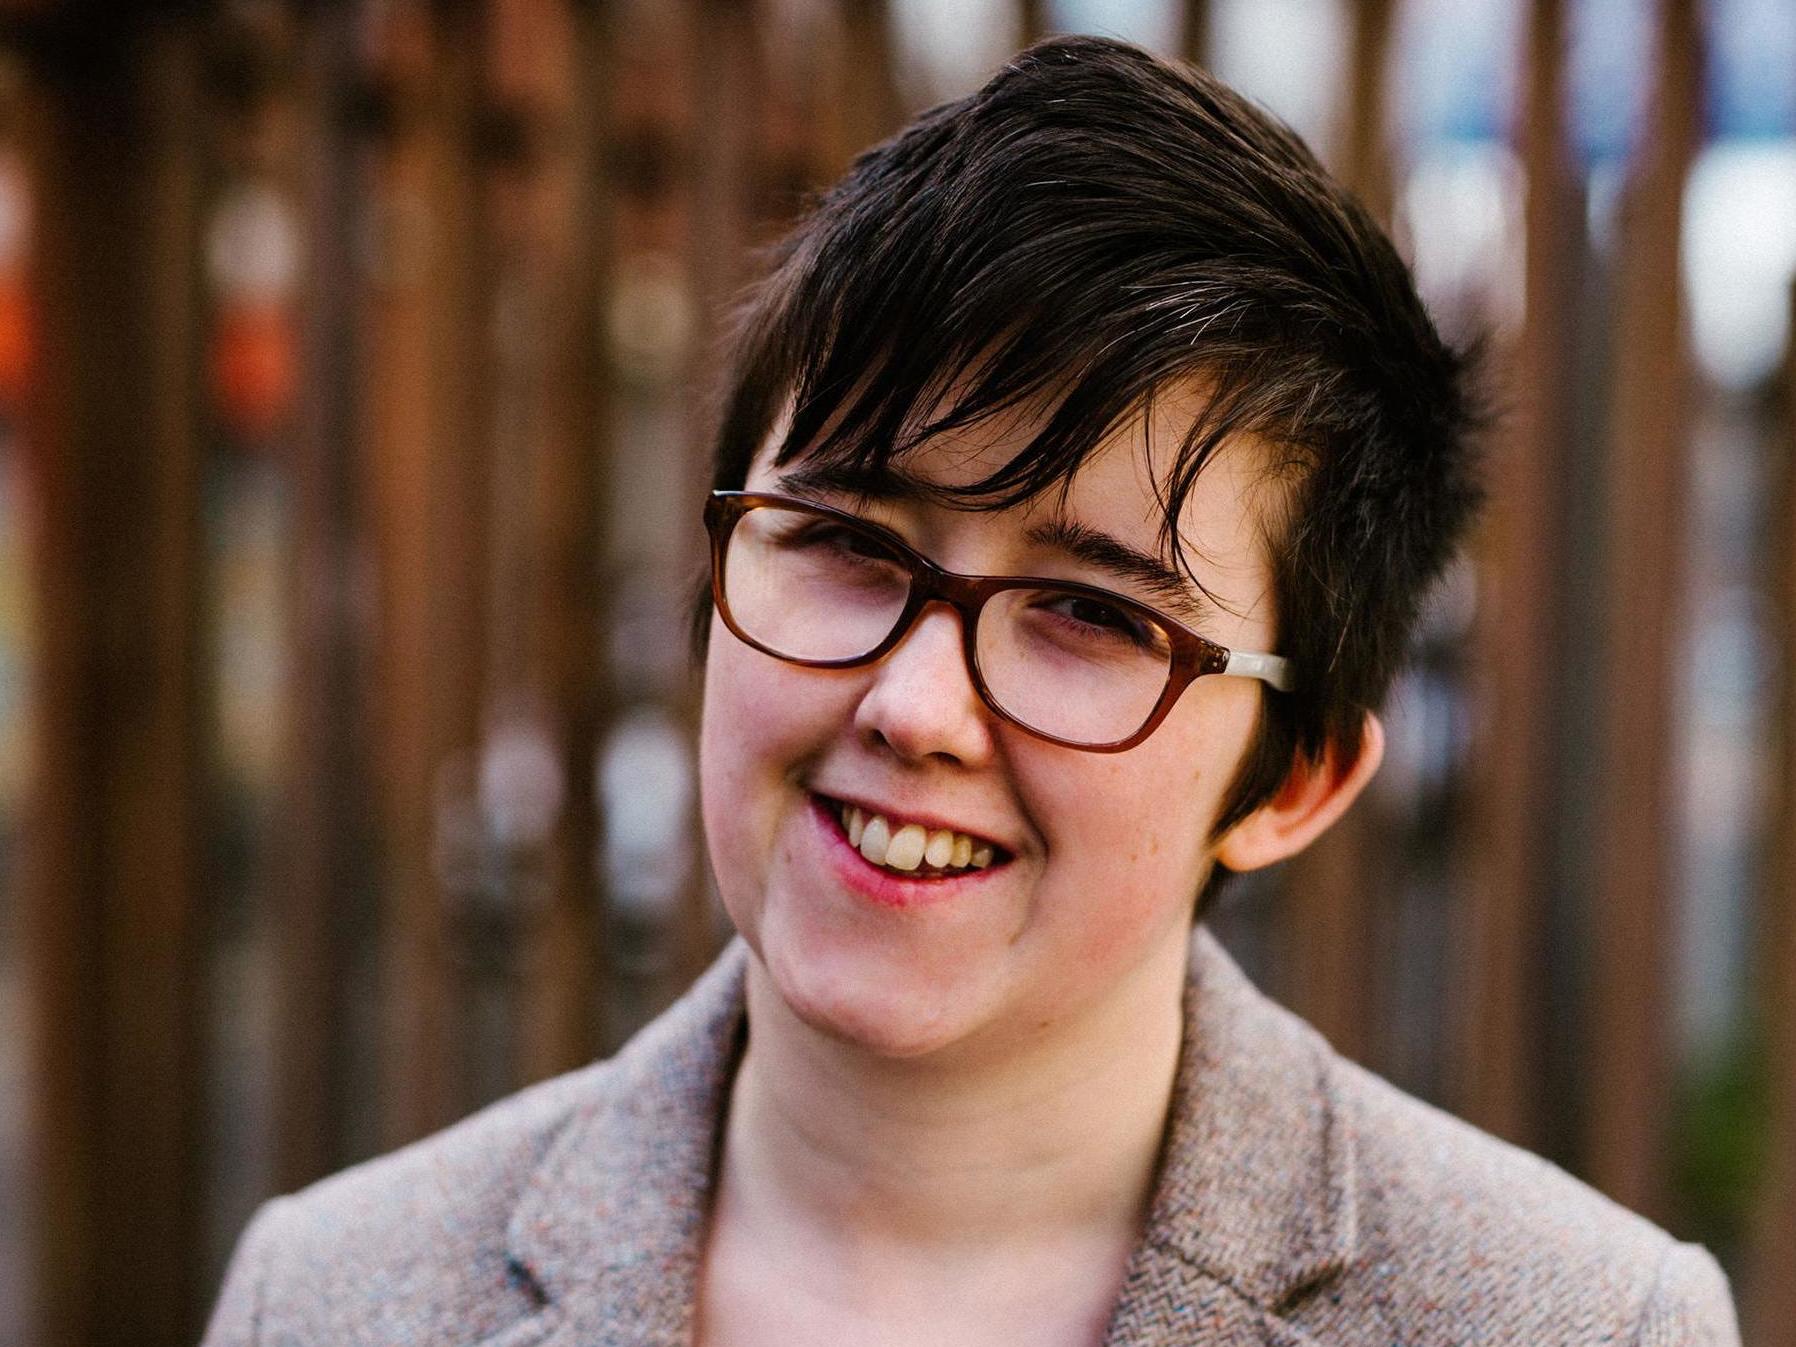 Lyra McKee was also a prominent gay rights activist who called for greater equality for same sex couples in Northern Ireland